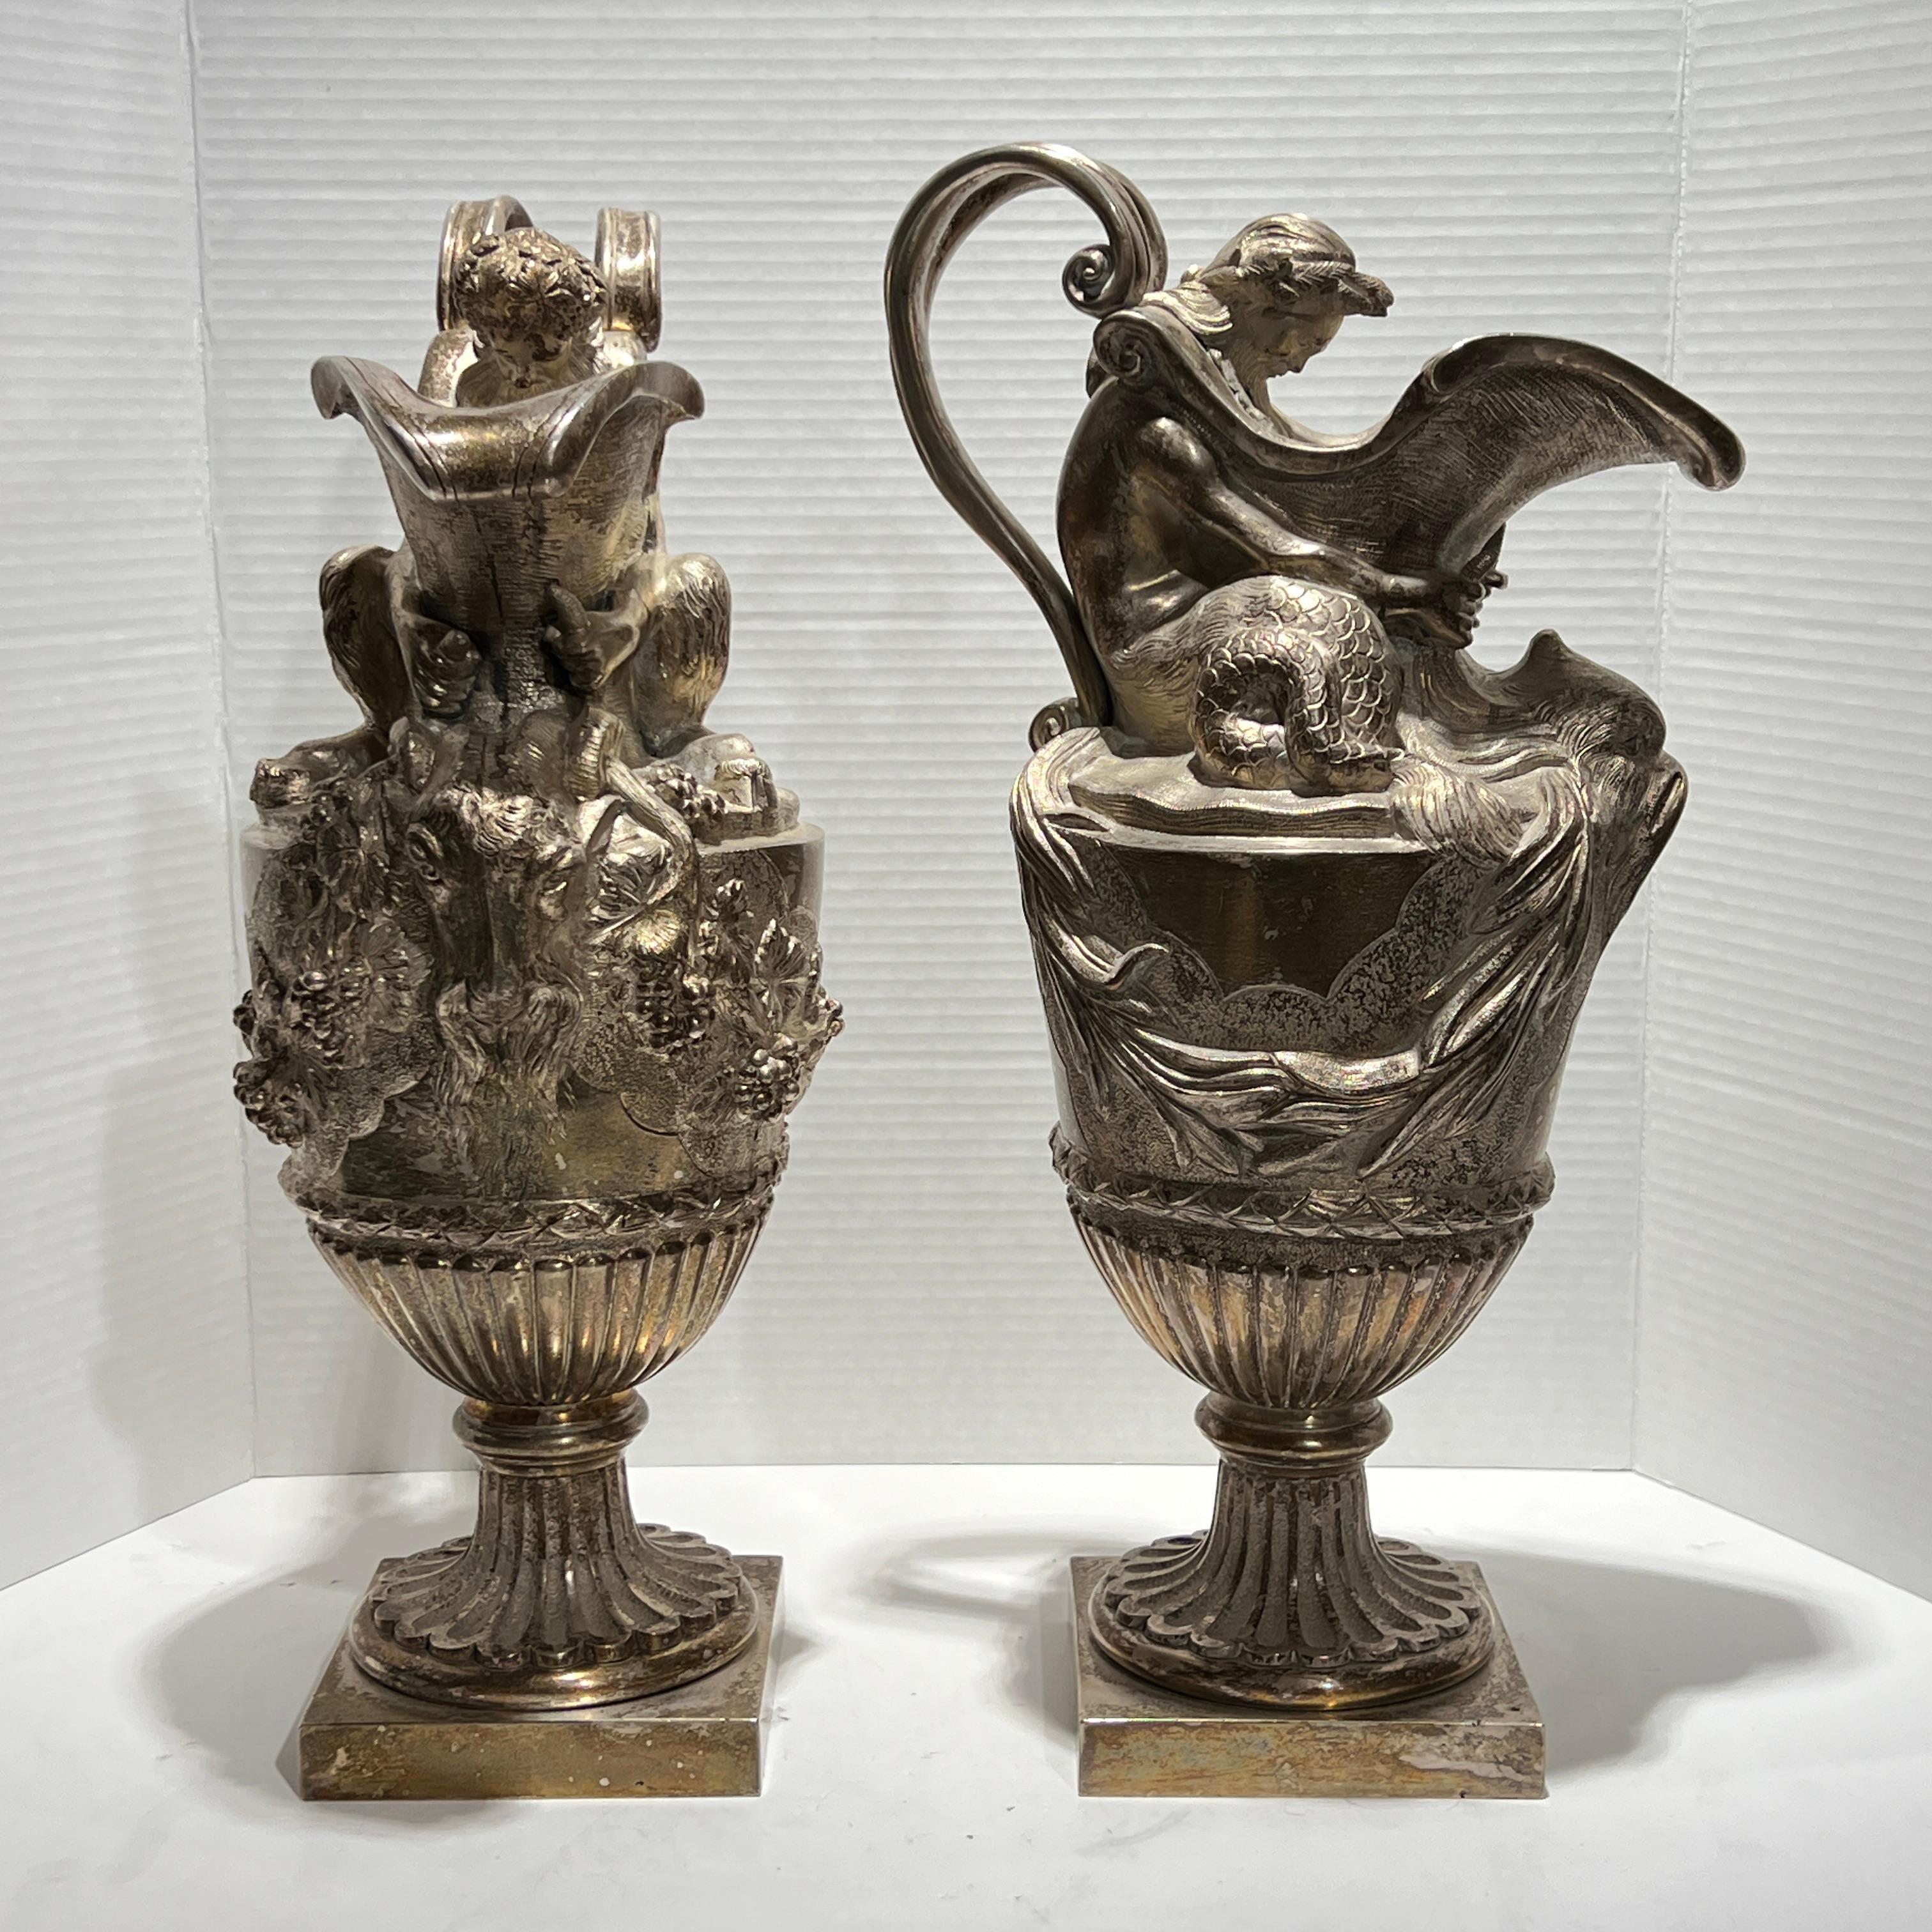 Pair of antique (19th century) French silvered bronze ewers in the French Louis XVI style, after the original designs by Sigisbert-Francois Michel (1728-1811). One with the figure of a triton with dolphin mask and rushes, and the other with a  satyr